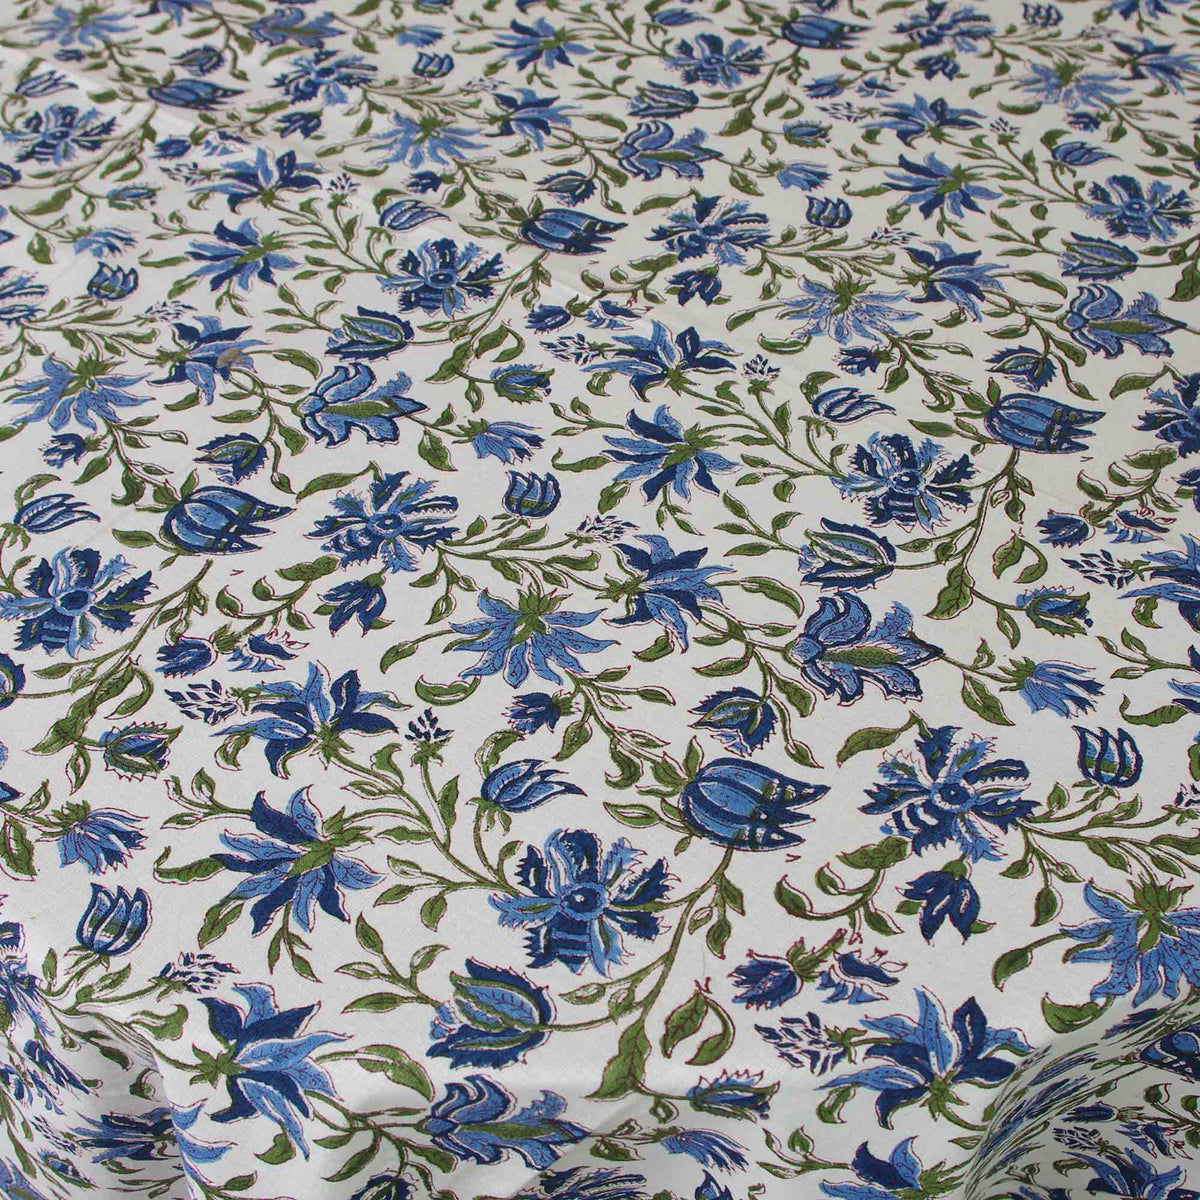 Blue Floral Pattern Block Printed Rectangle Tablecloth Table Cover